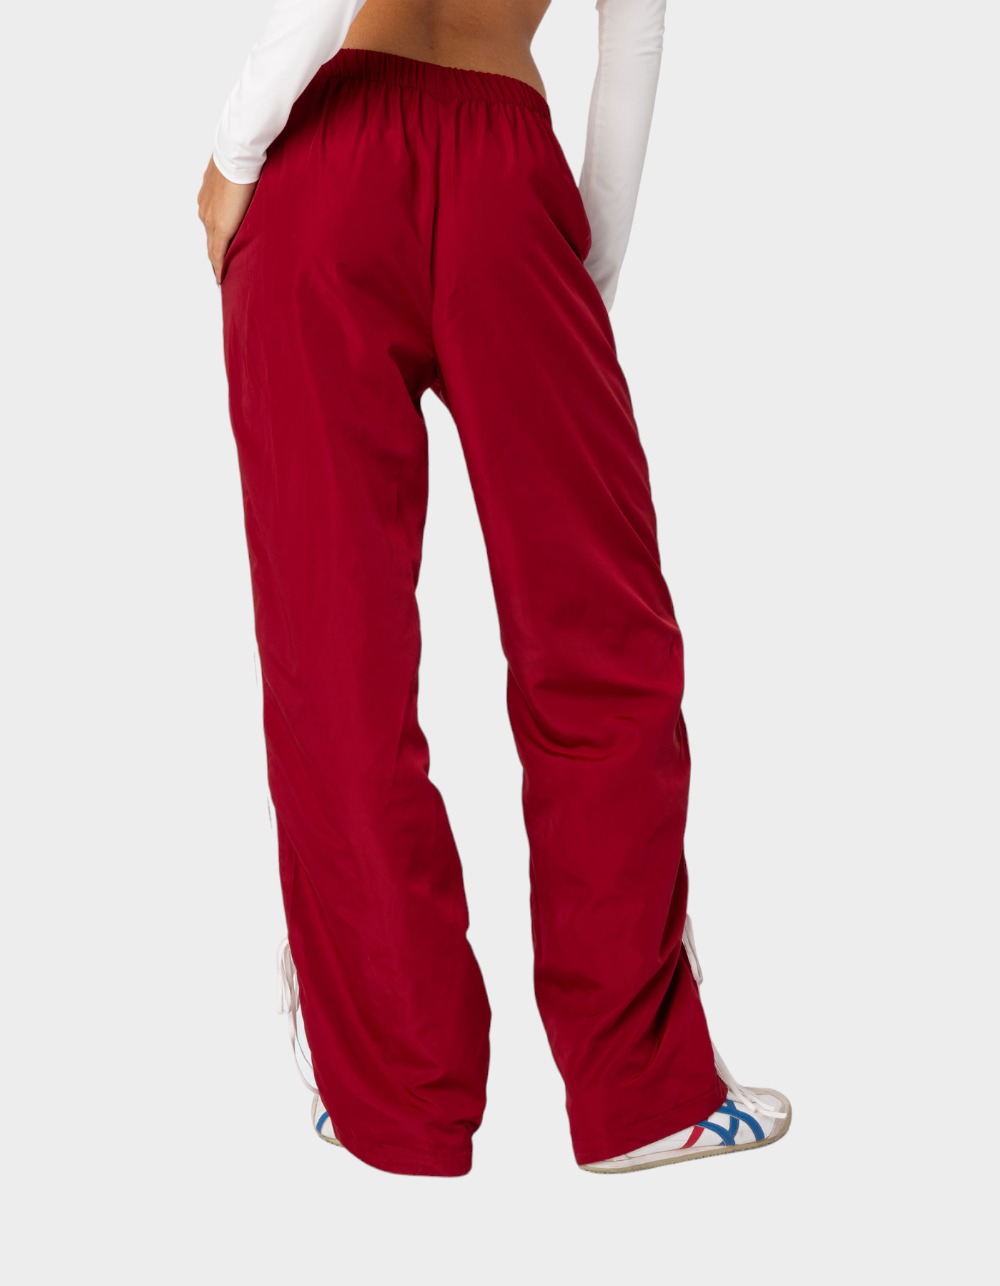 EDIKTED Remy Ribbon Womens Track Pants - RED